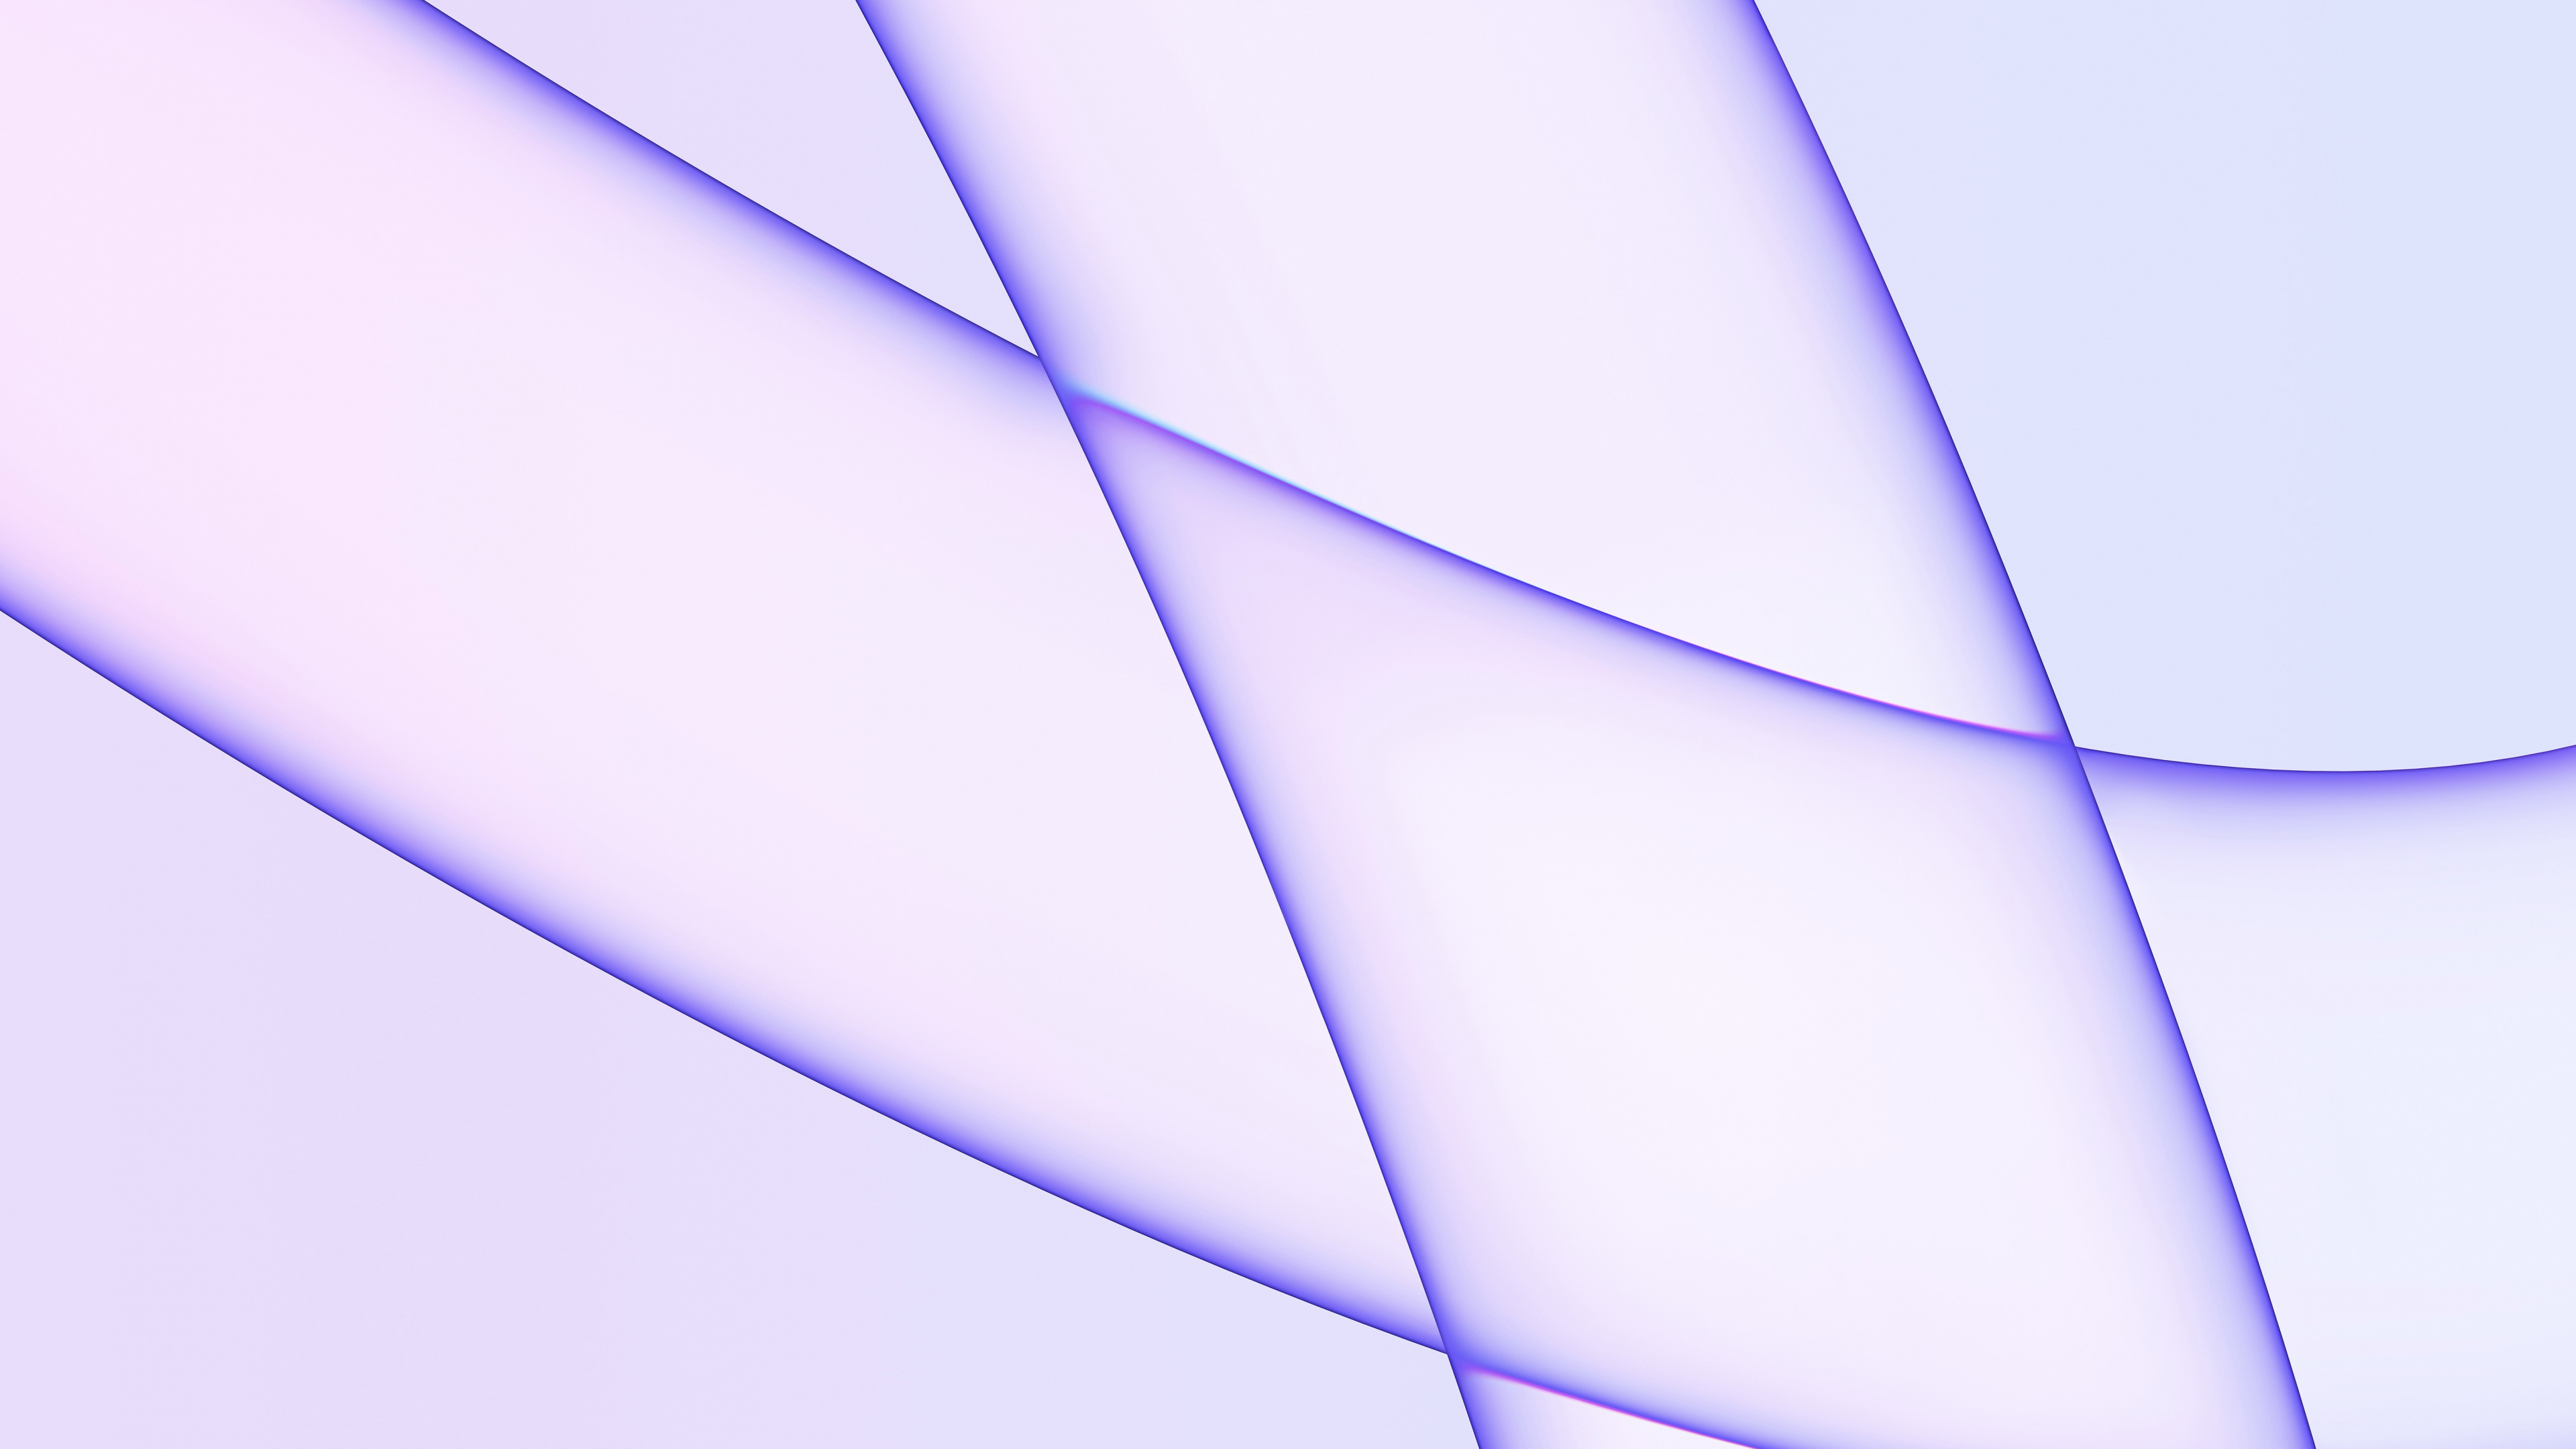 IMac Color Matching Wallpaper in Light Purple for IPad or Desktop. Wallpaper in 3840x2160 Resolution